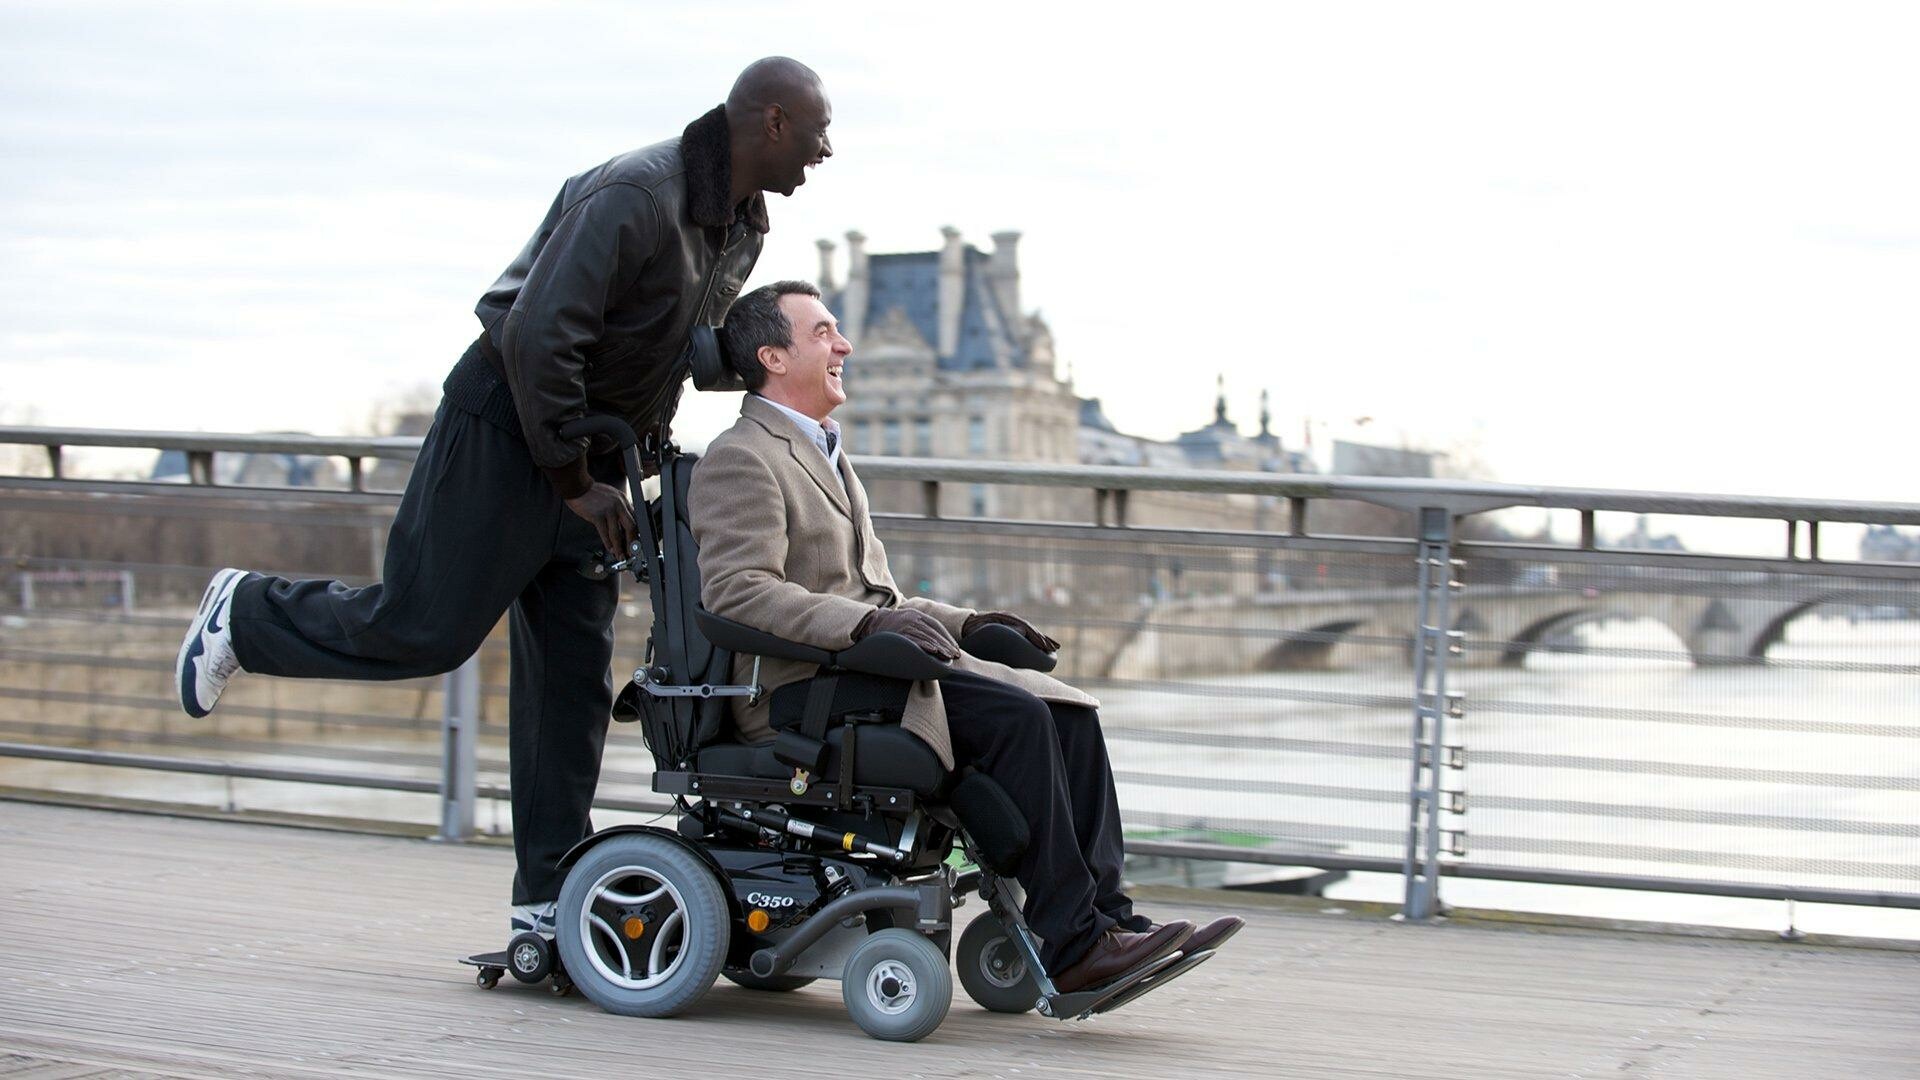 Intouchables: The official entry of France to the Best Foreign Language Film at the 85th Academy Awards 2013. 1920x1080 Full HD Wallpaper.